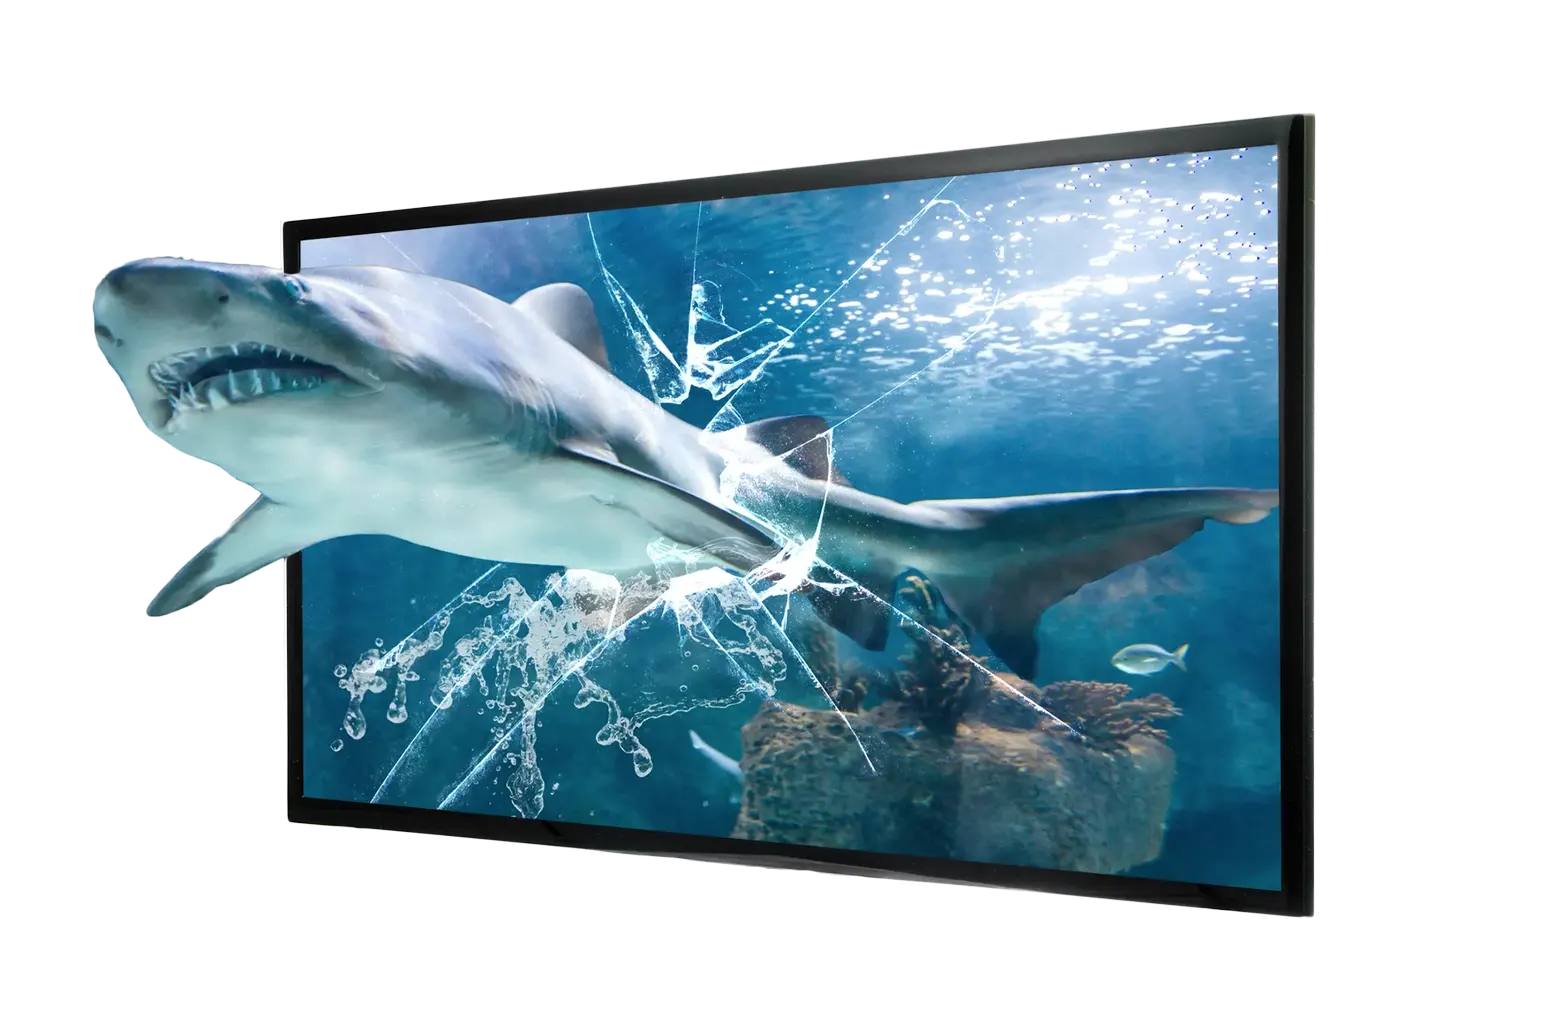 Shark Swimming out of Plasma Television